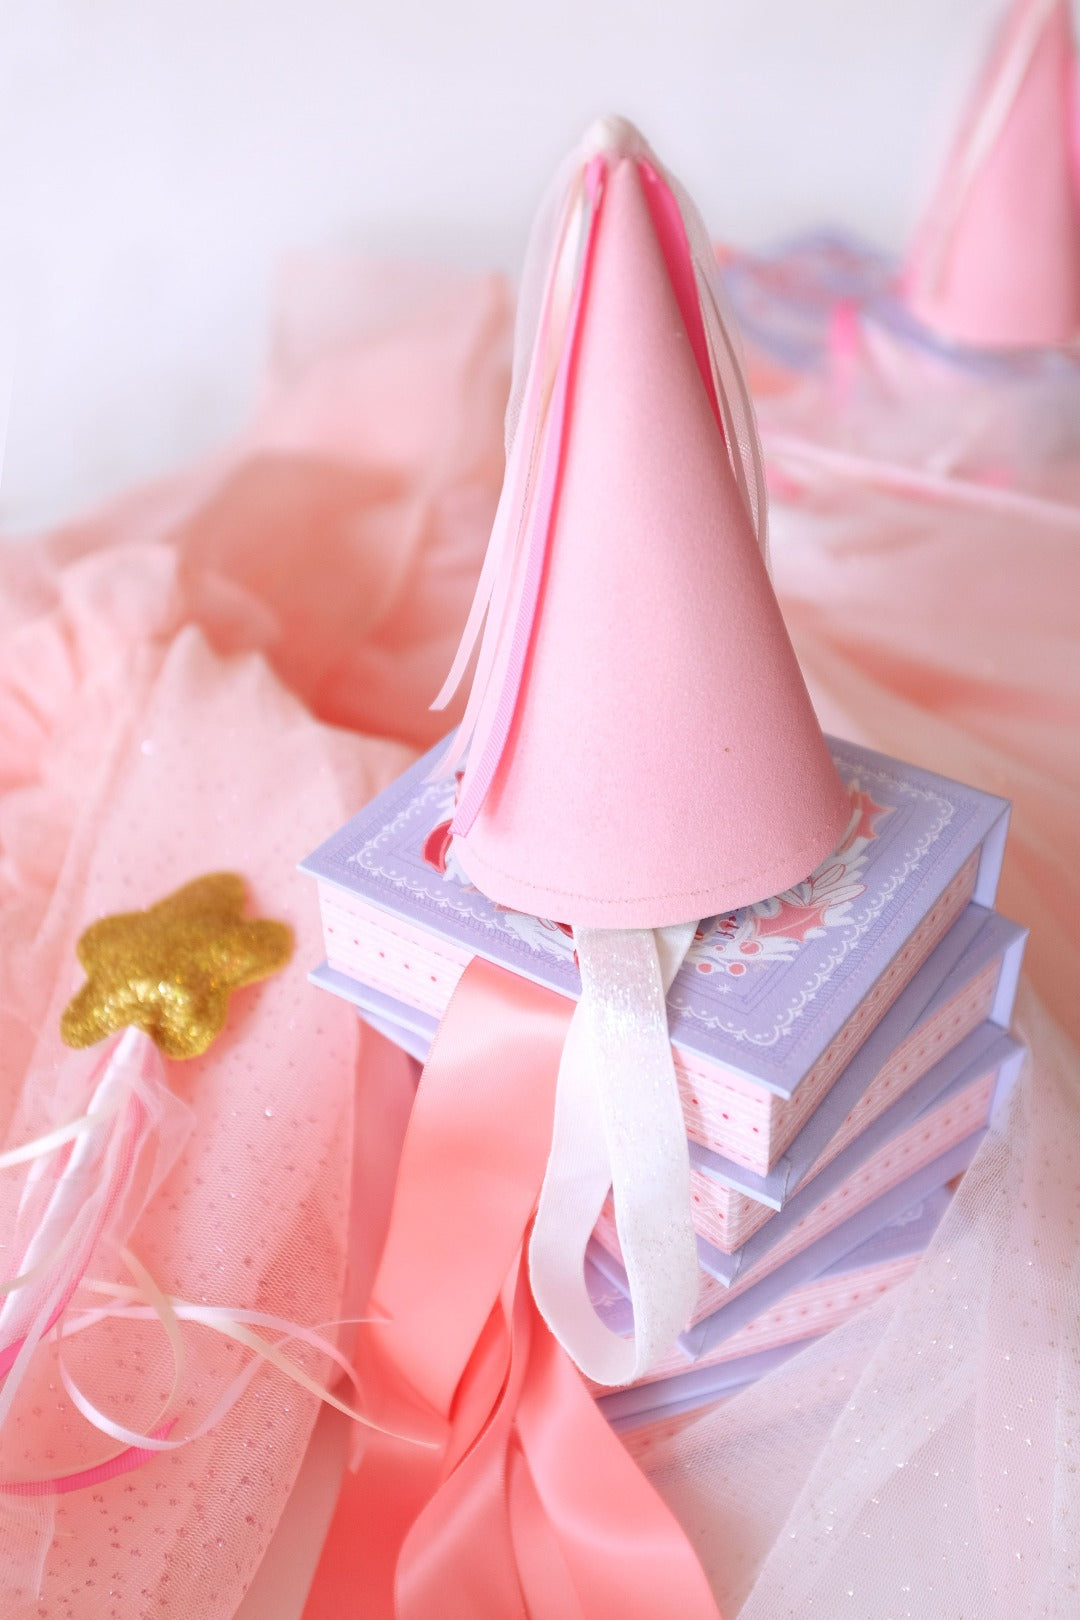 magical sparkly wand and pink party hat